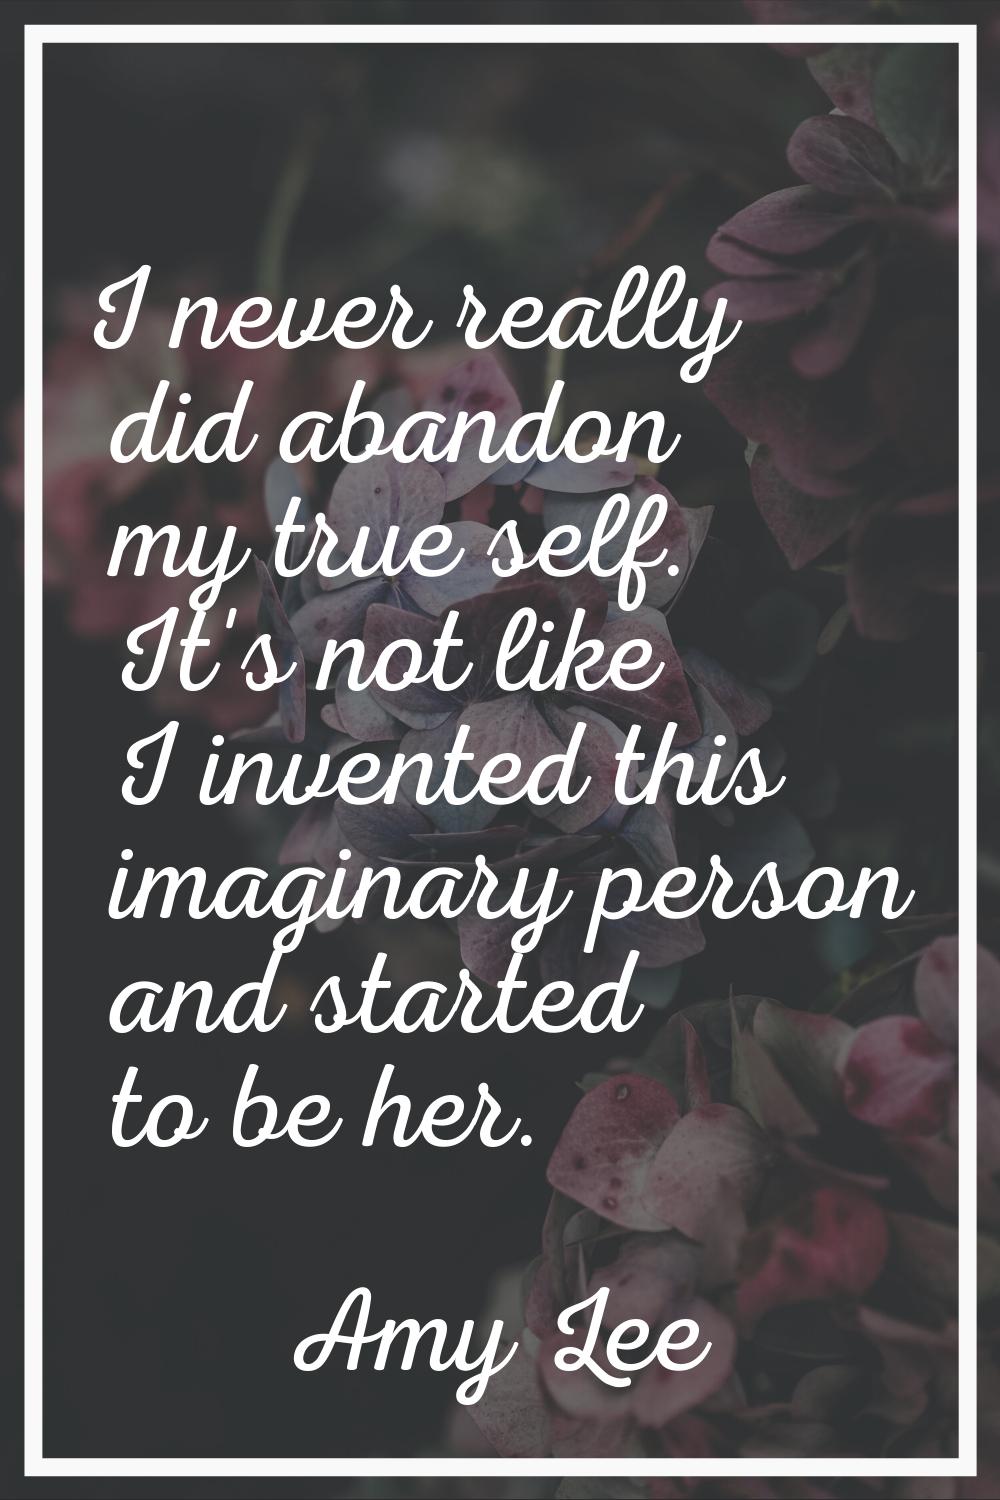 I never really did abandon my true self. It's not like I invented this imaginary person and started